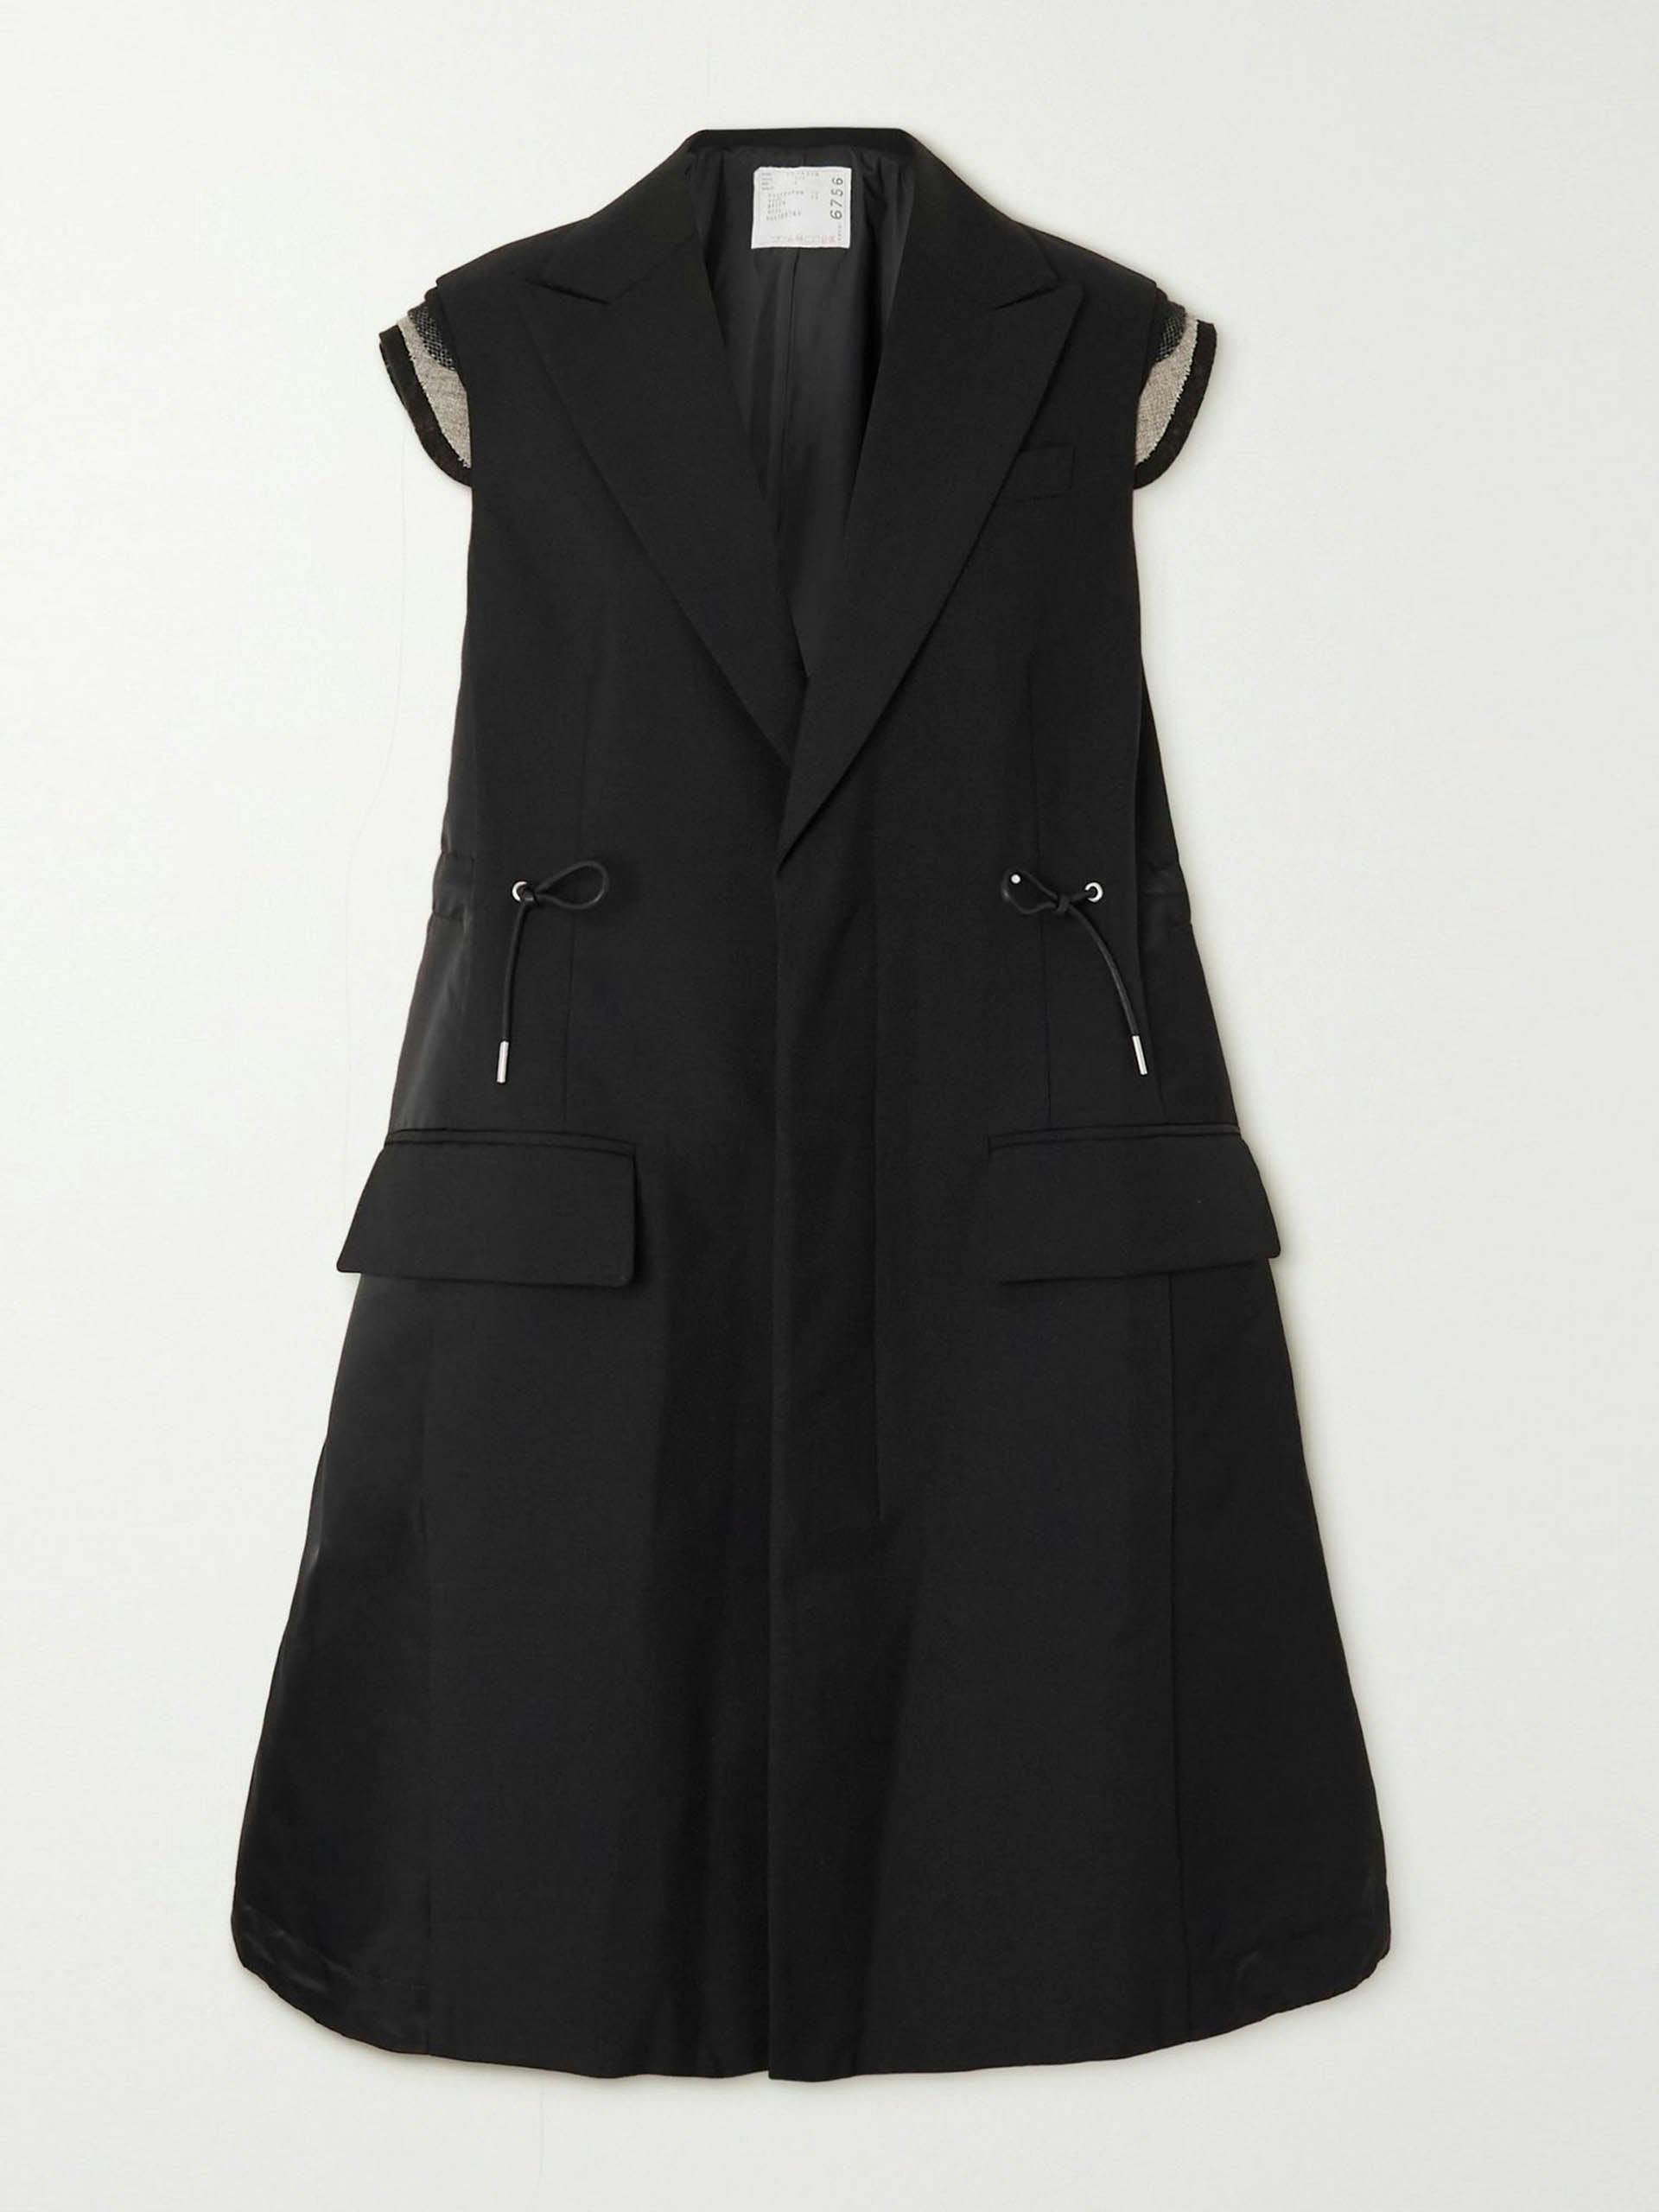 Black wool-blend and shell vest